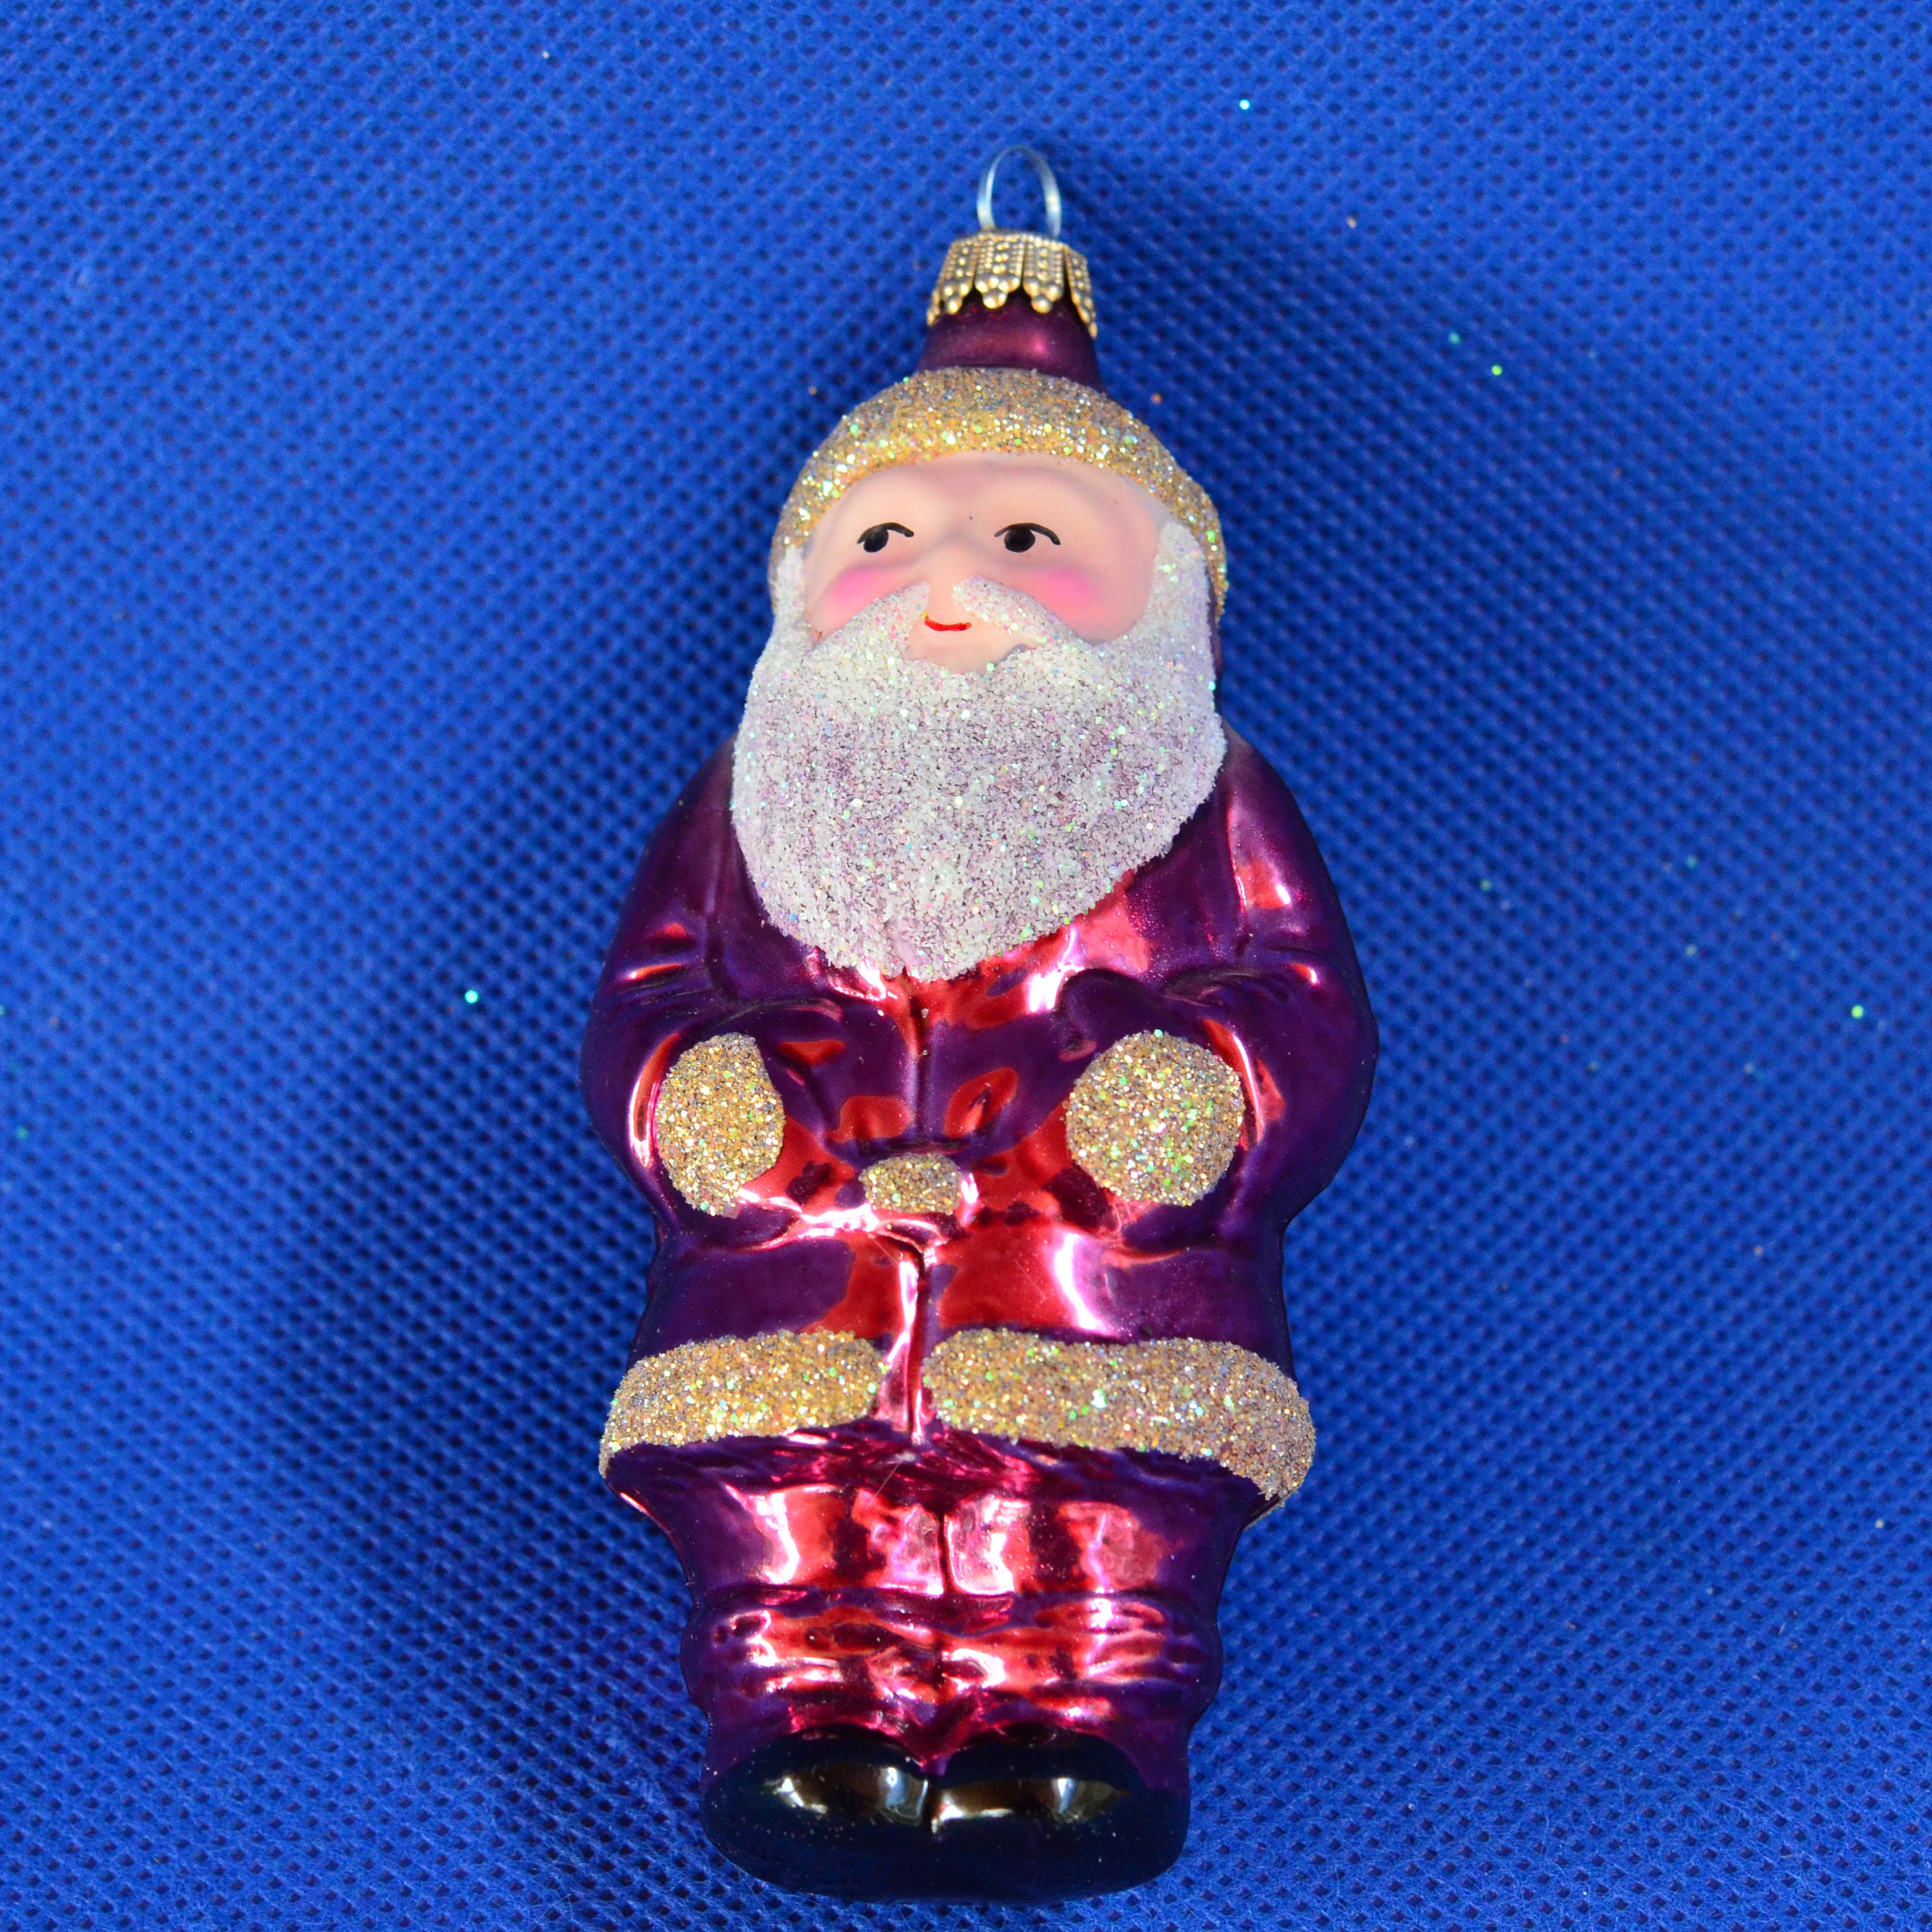 Décor Lauscha Glitter Original Etsy Box Hand Holiday Ornament Decorated Krebs Sparkle Christmas Santa Germany Made Glass - in West Blown